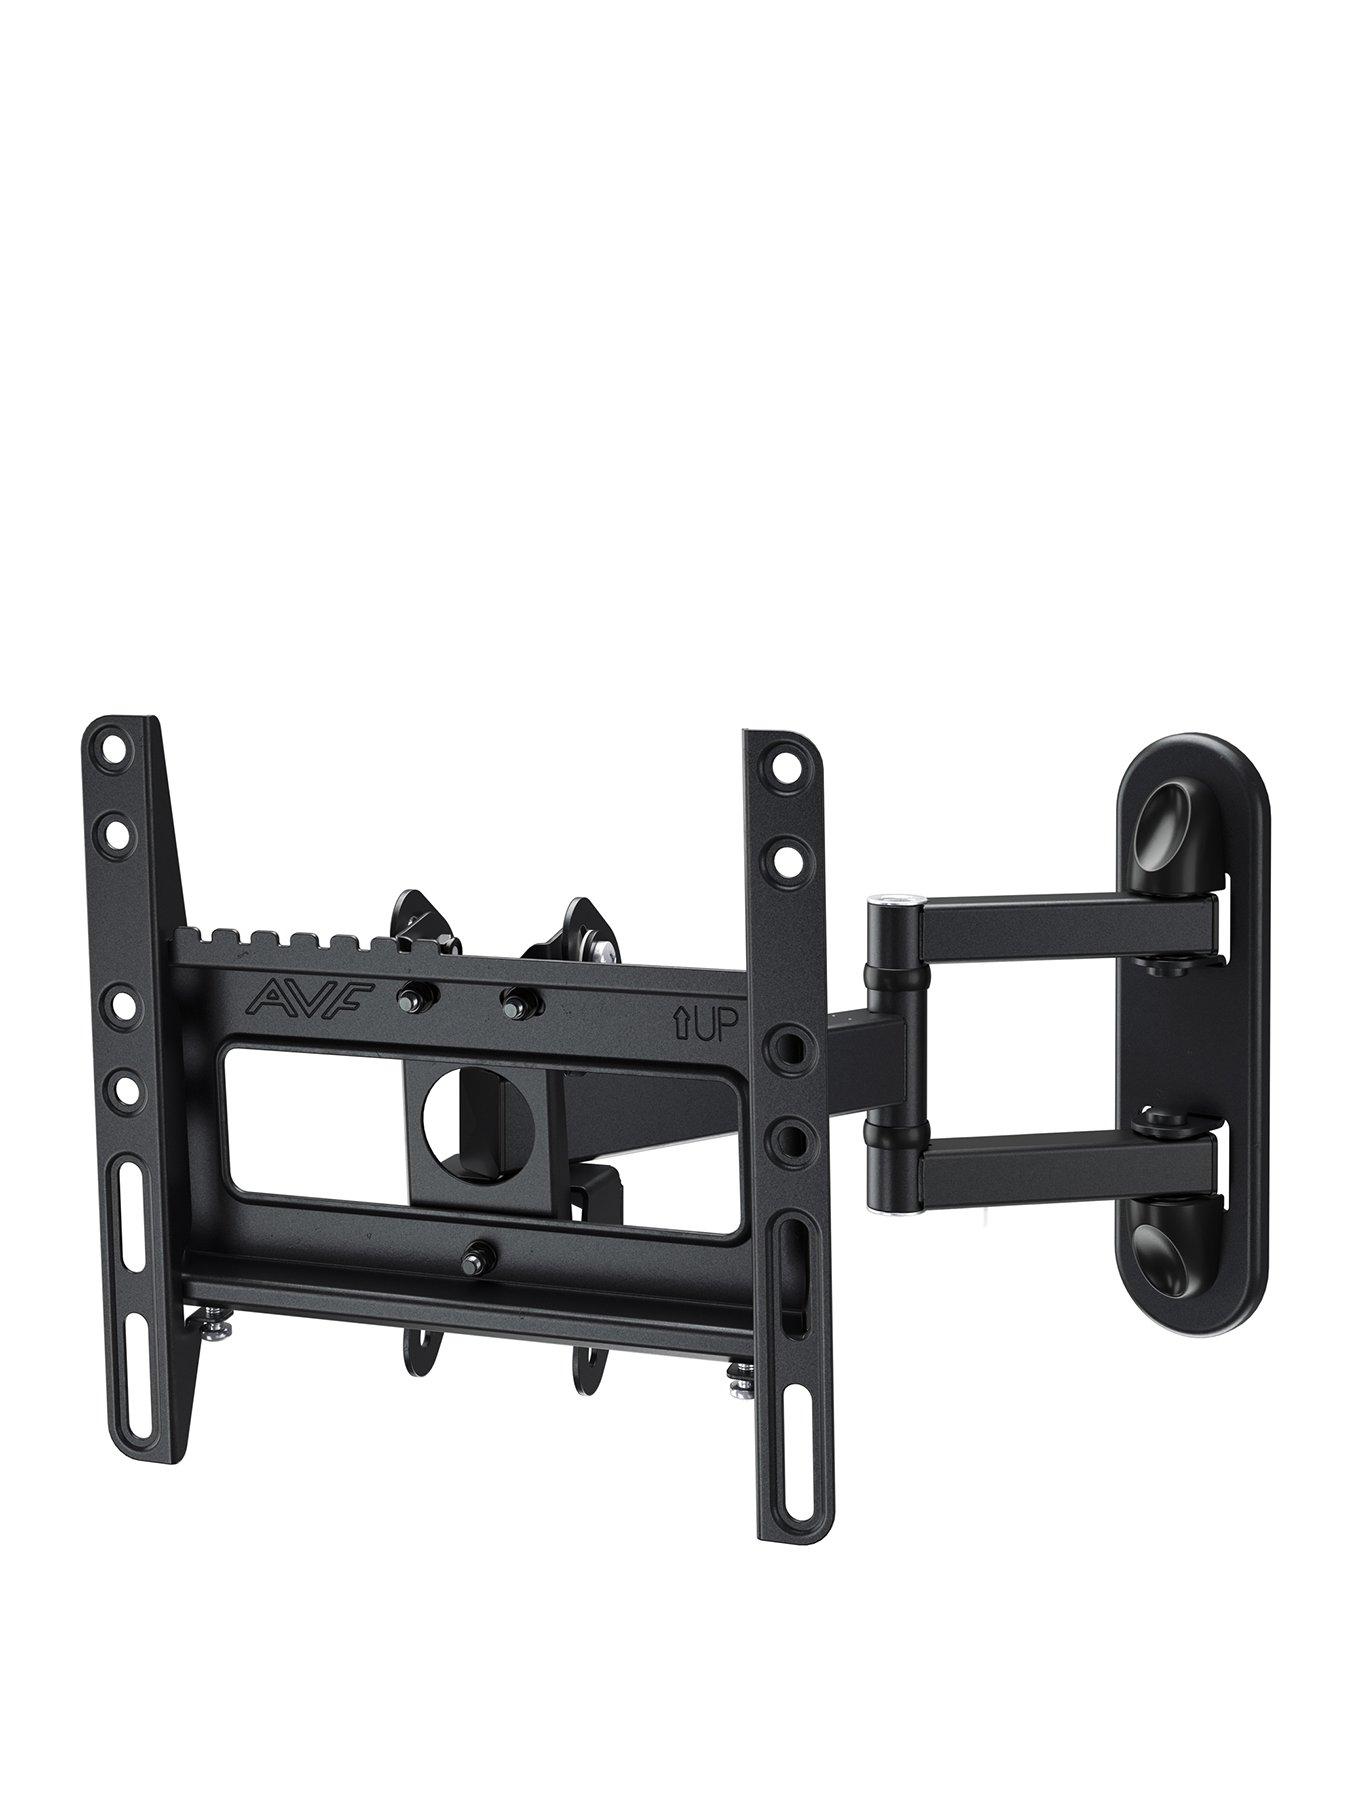 Tv wall mounts  Tv stands, wall mounts & accessories